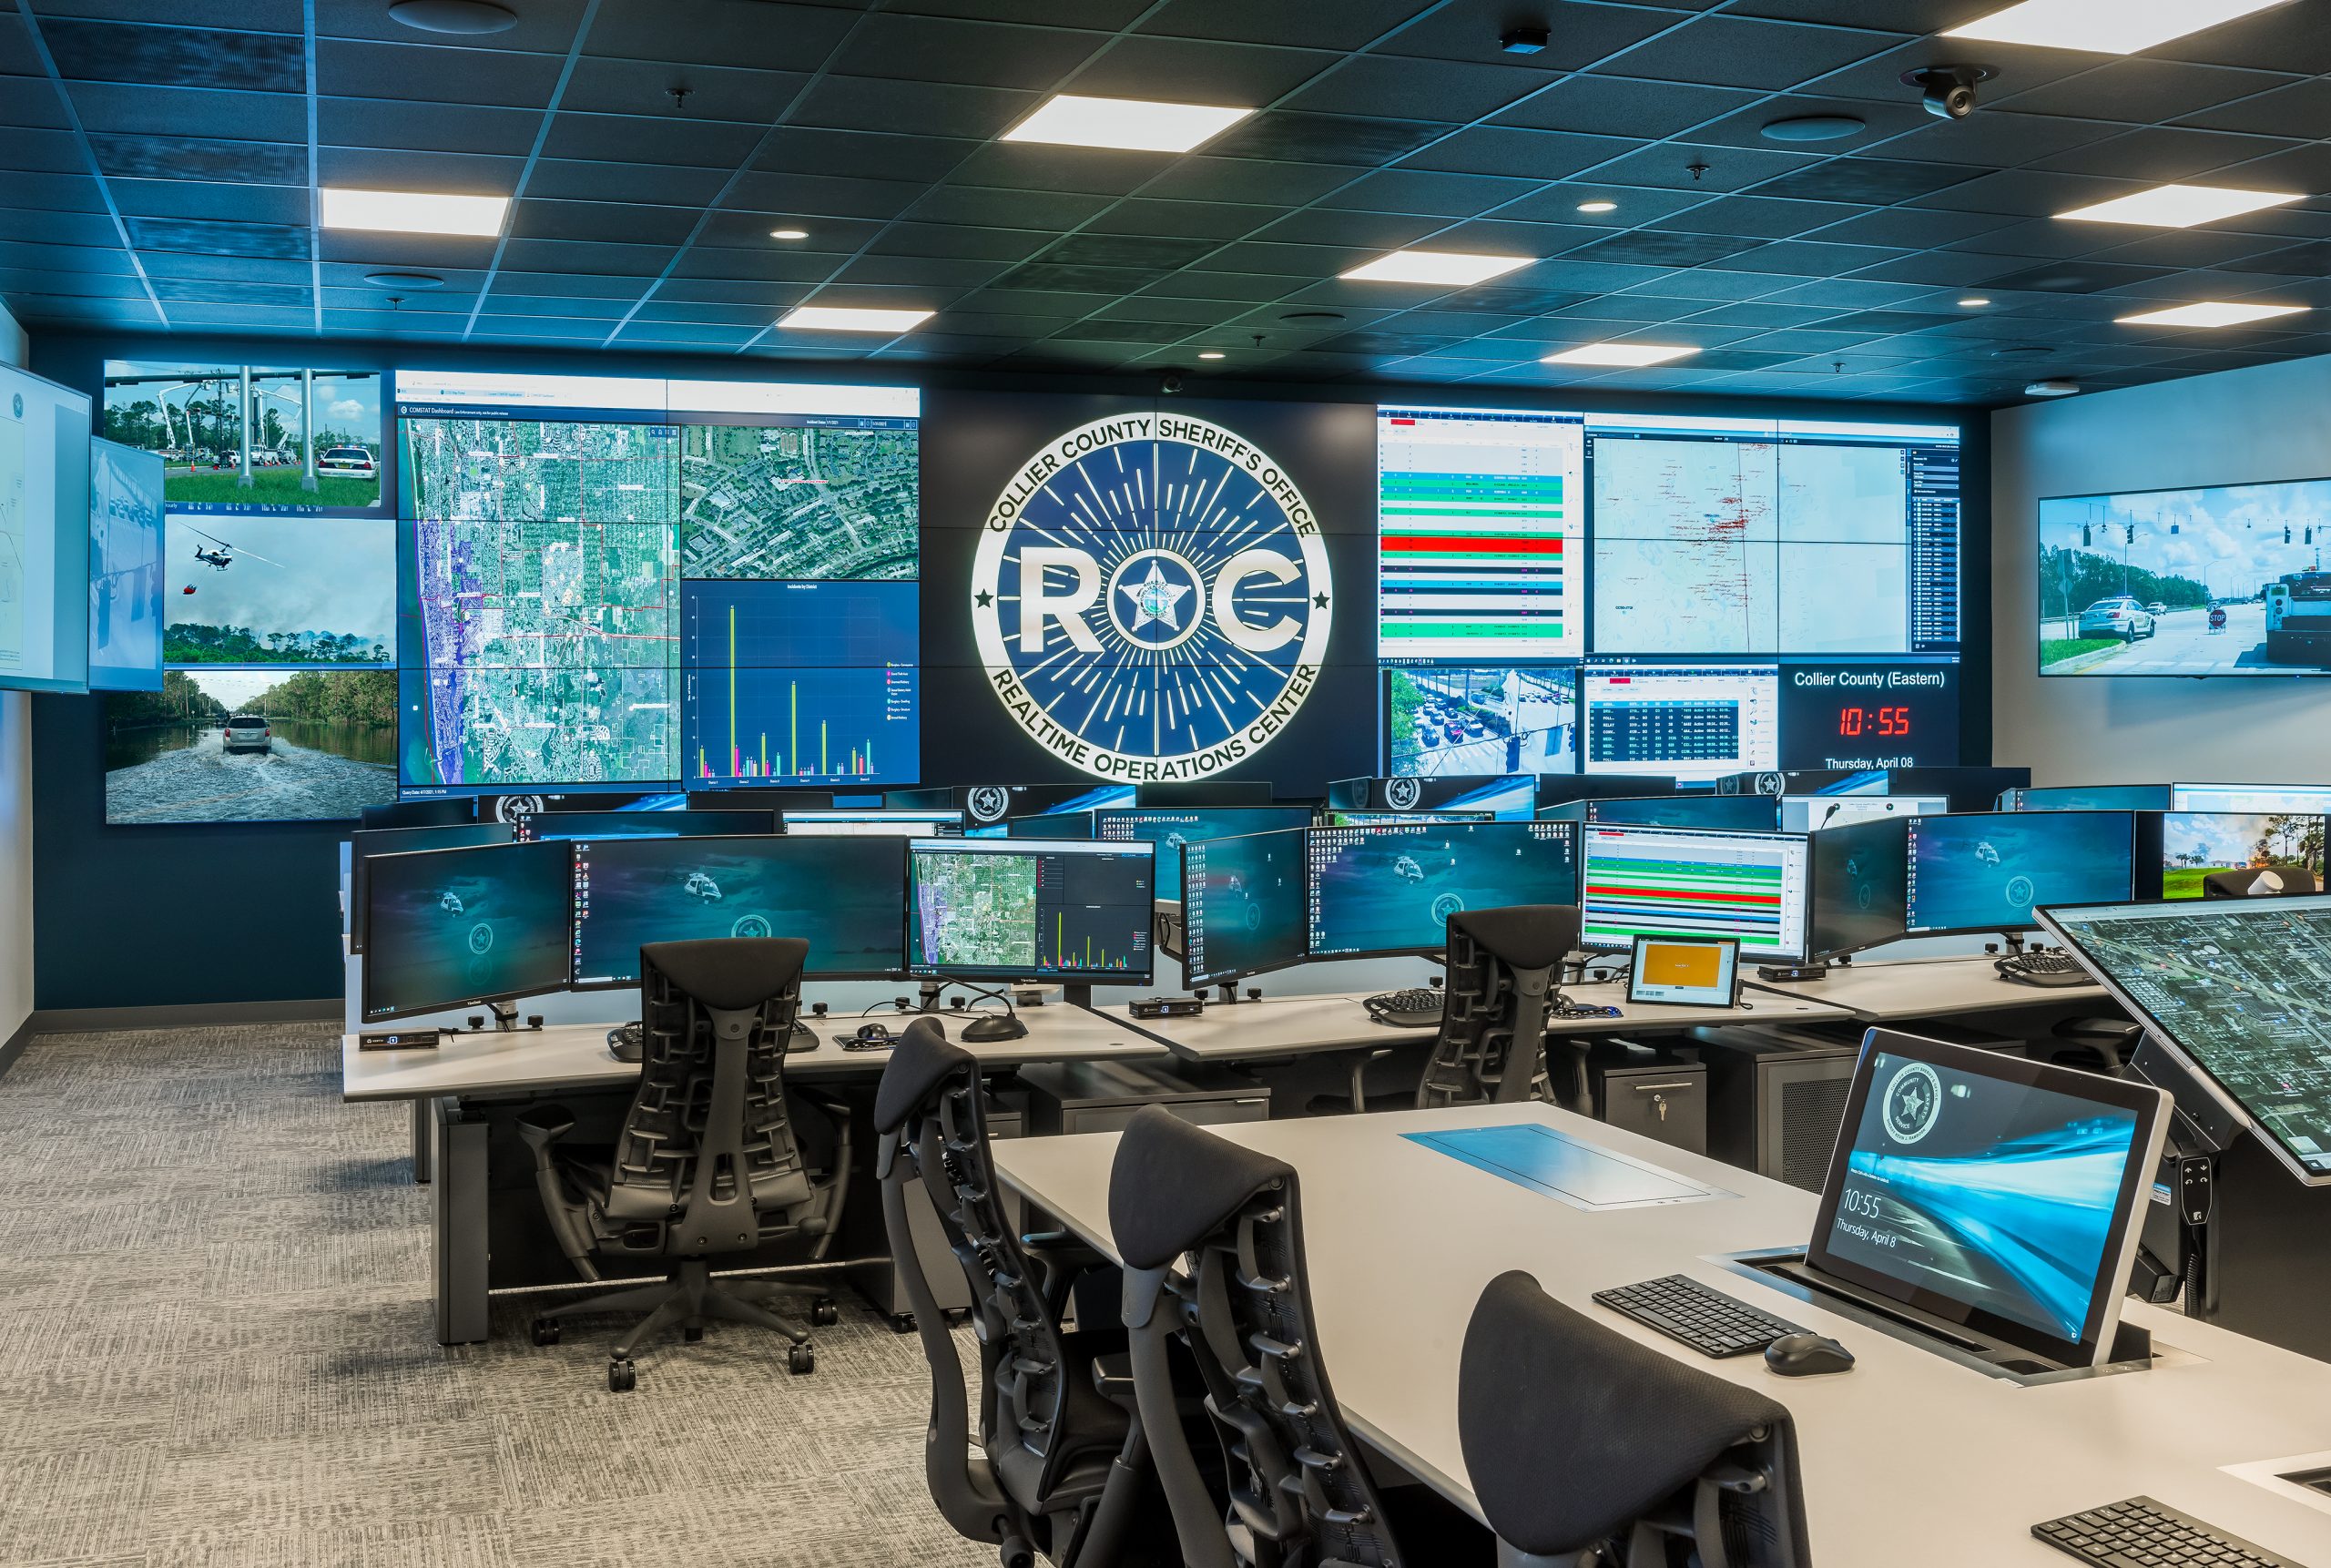 image of a realtime operations center with consoles and central video wall